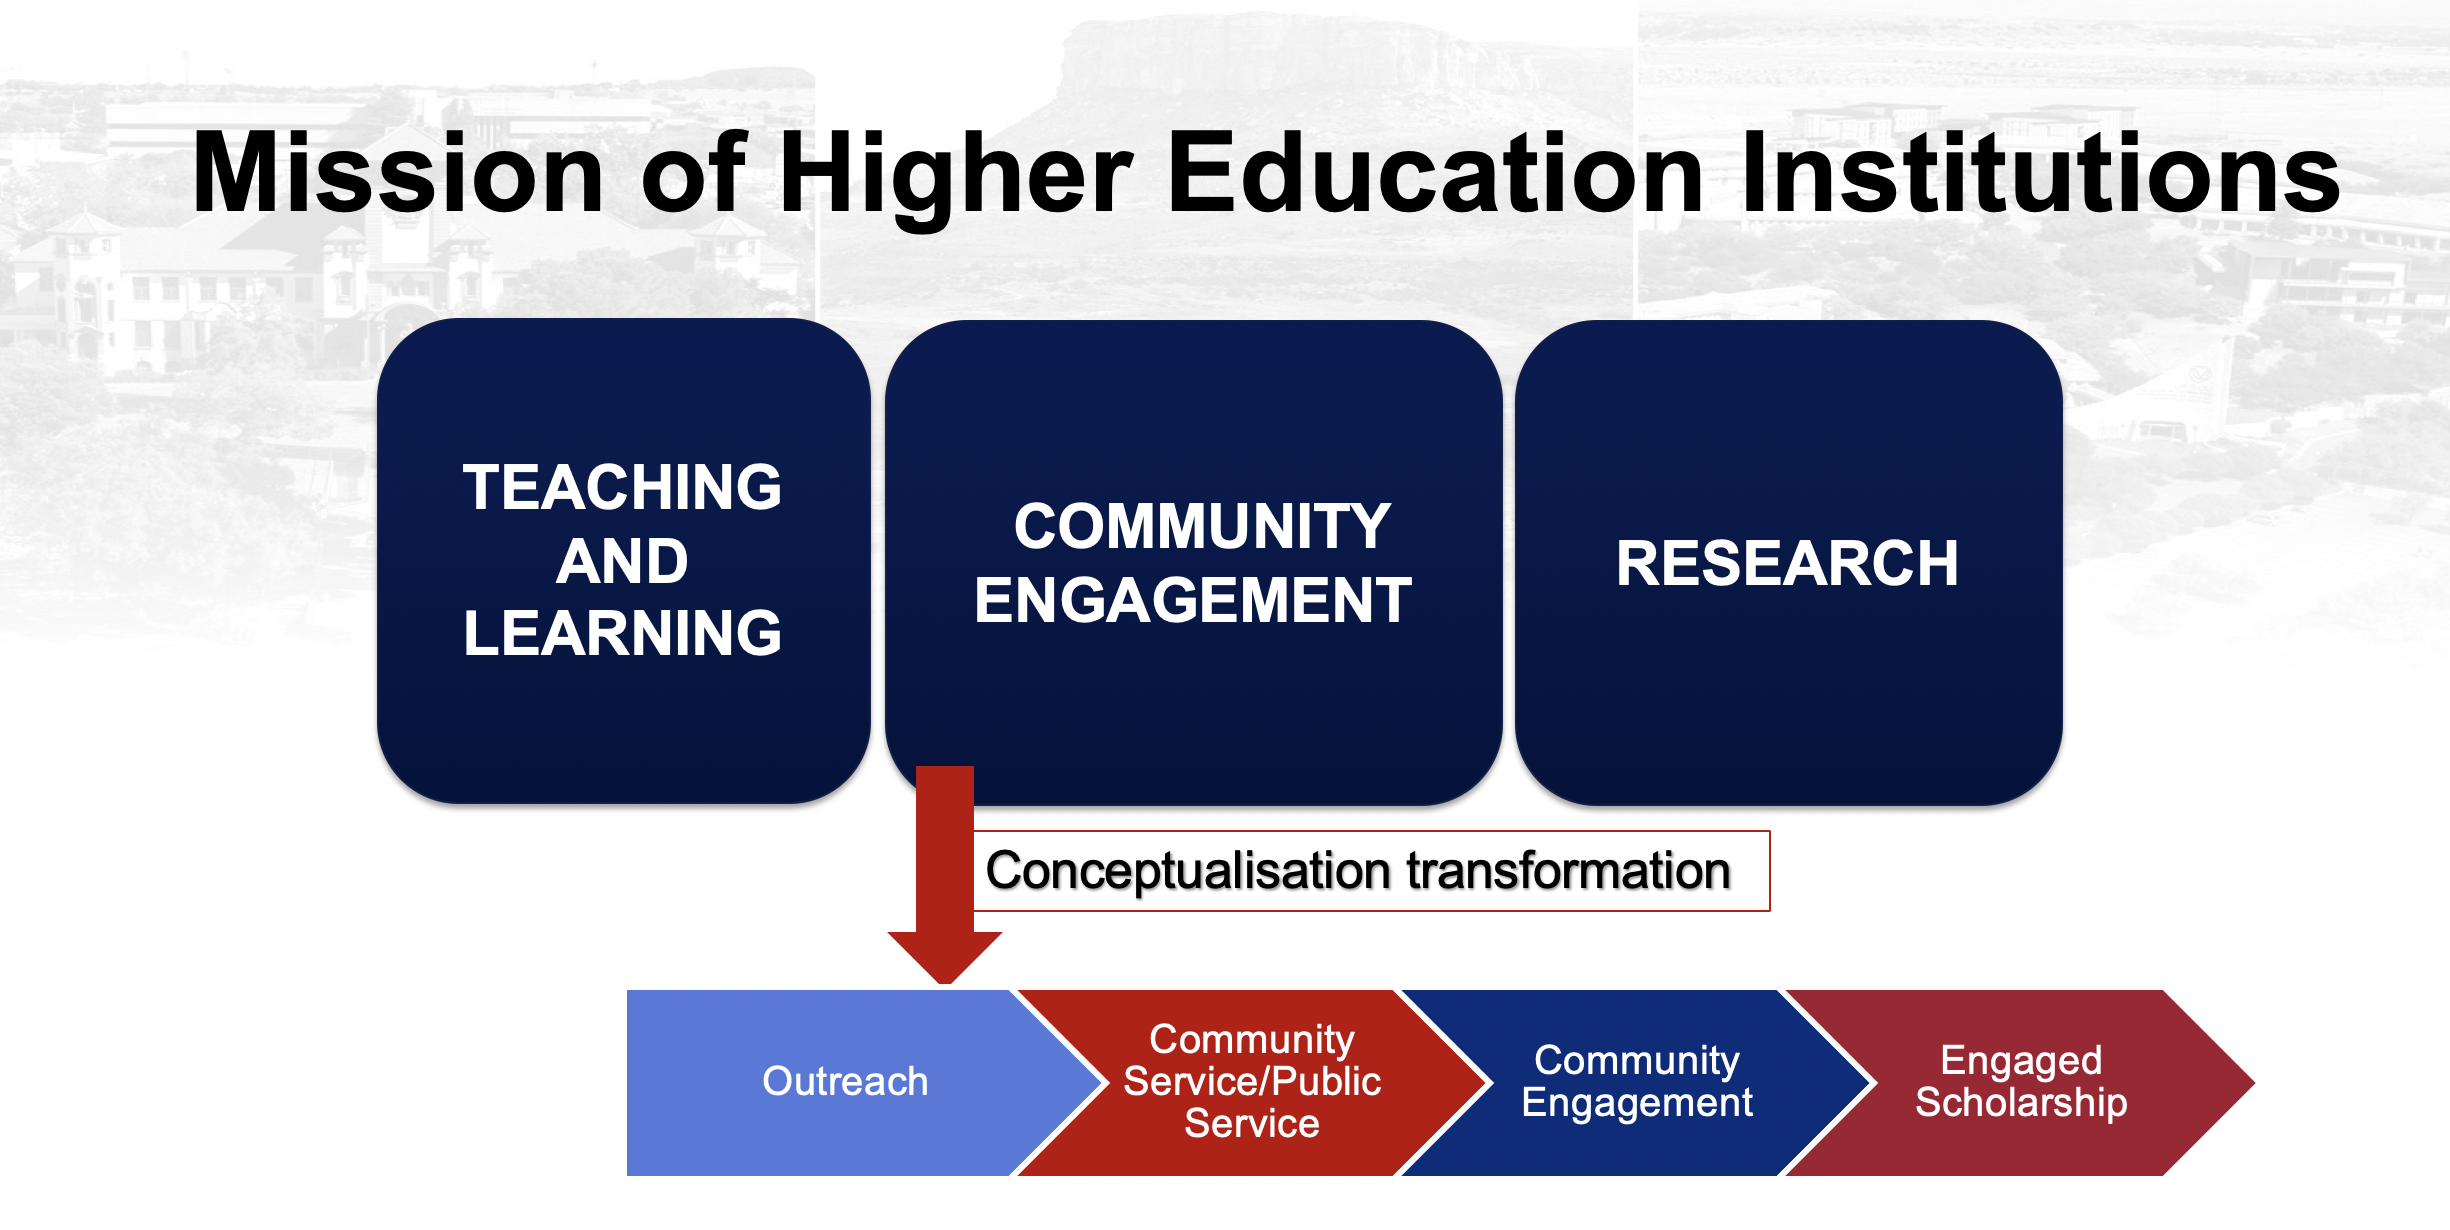 Mission of Higher Education Institutions